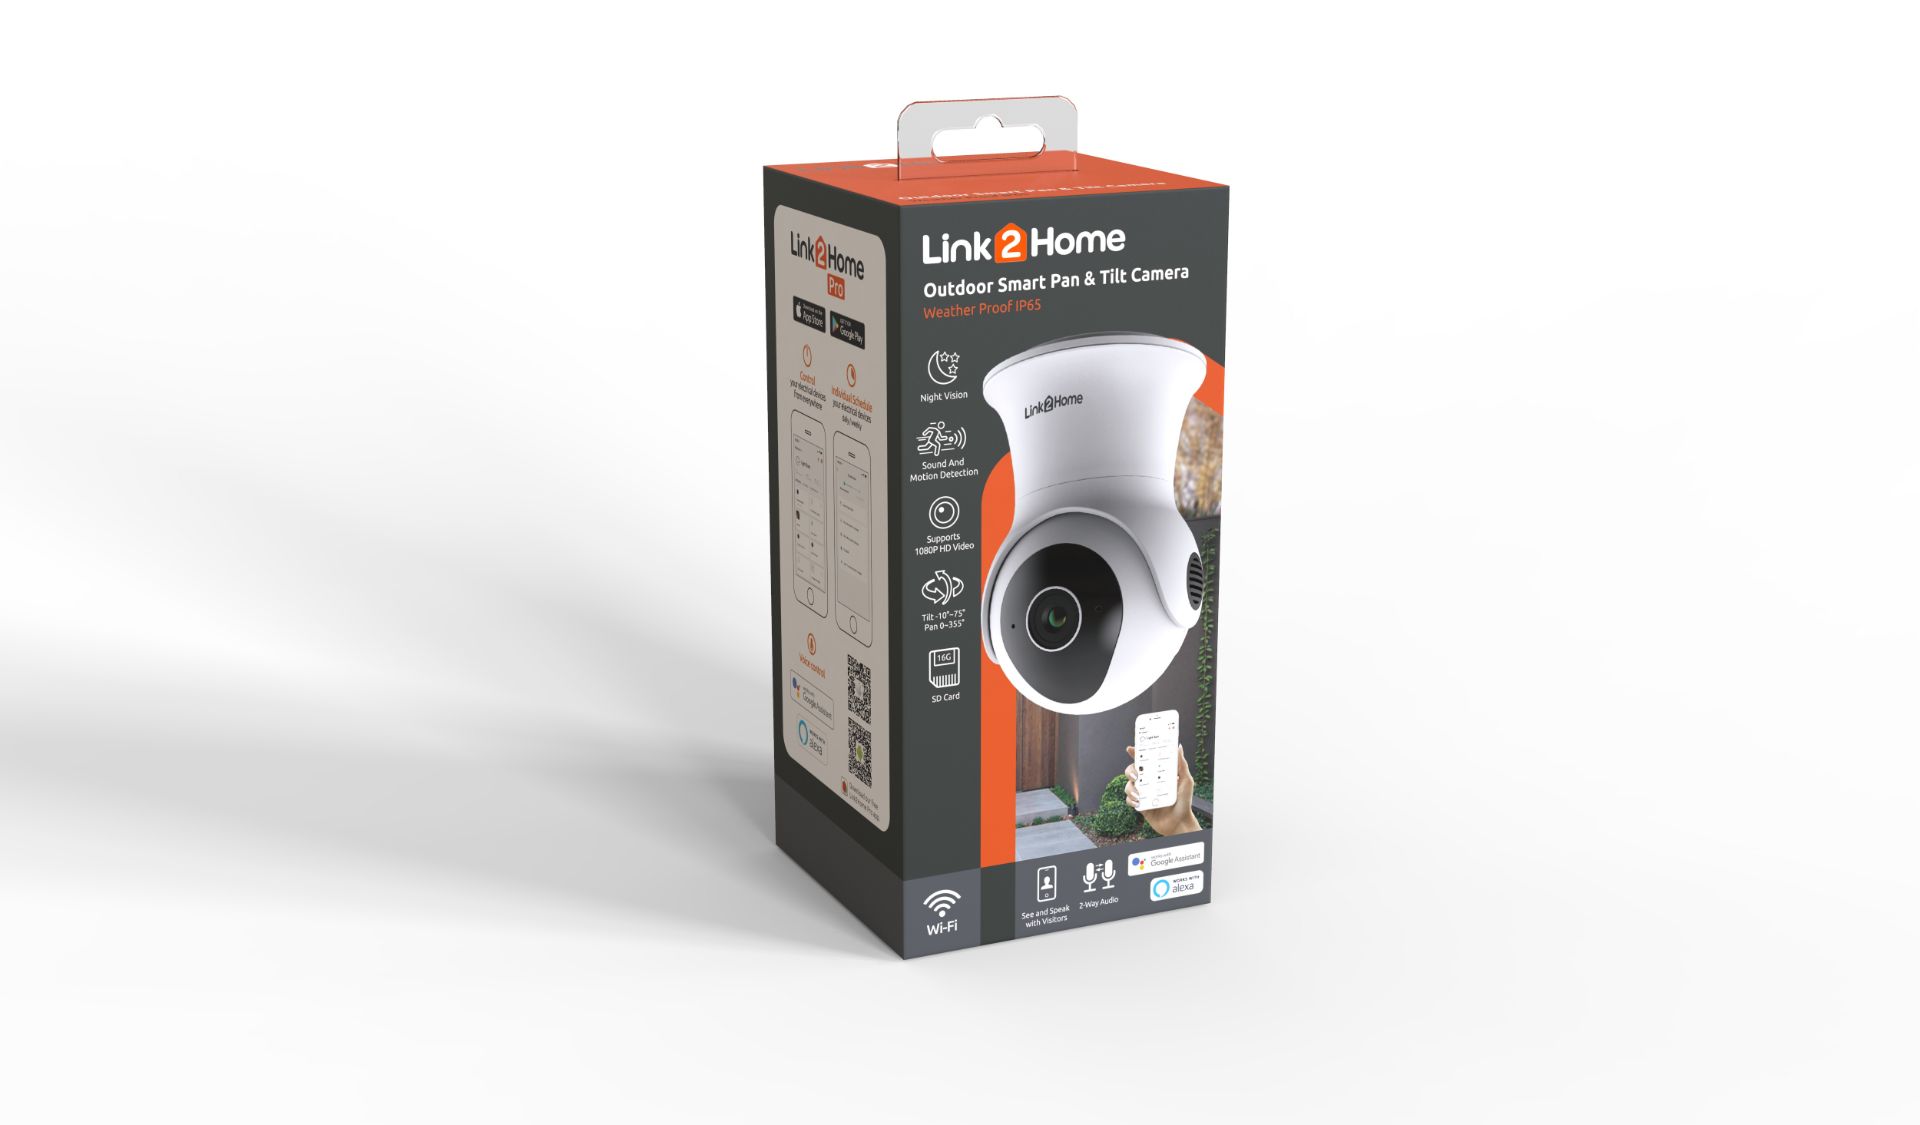 A Link2Home 'L2H-ODRCameraP/T' External Weatherproof Wi-Fi Camera with Pan and Tilt Operation - New, - Image 2 of 14